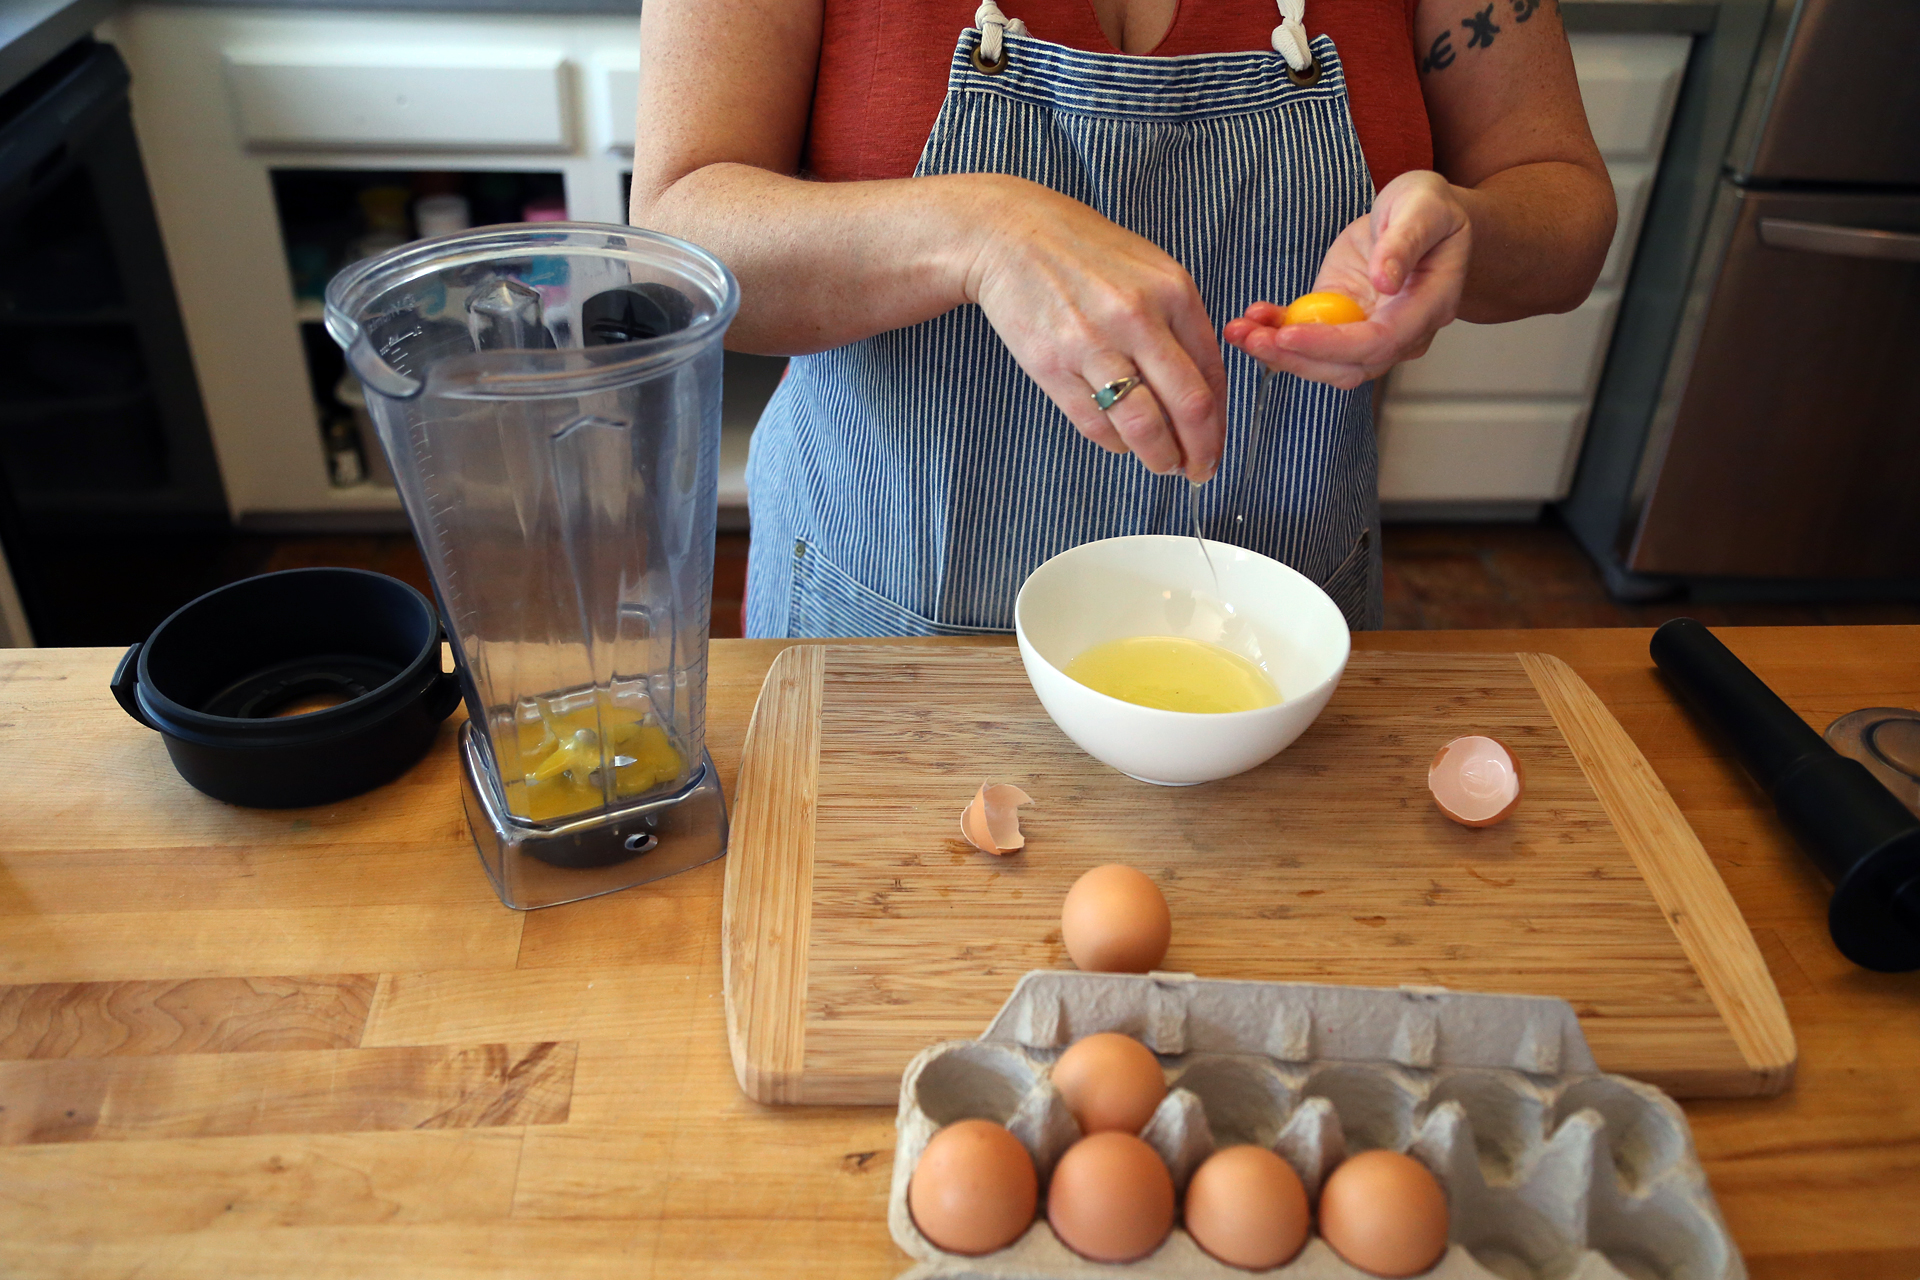 Separate the egg yolks and add them to the blender to make the Hollandaise.